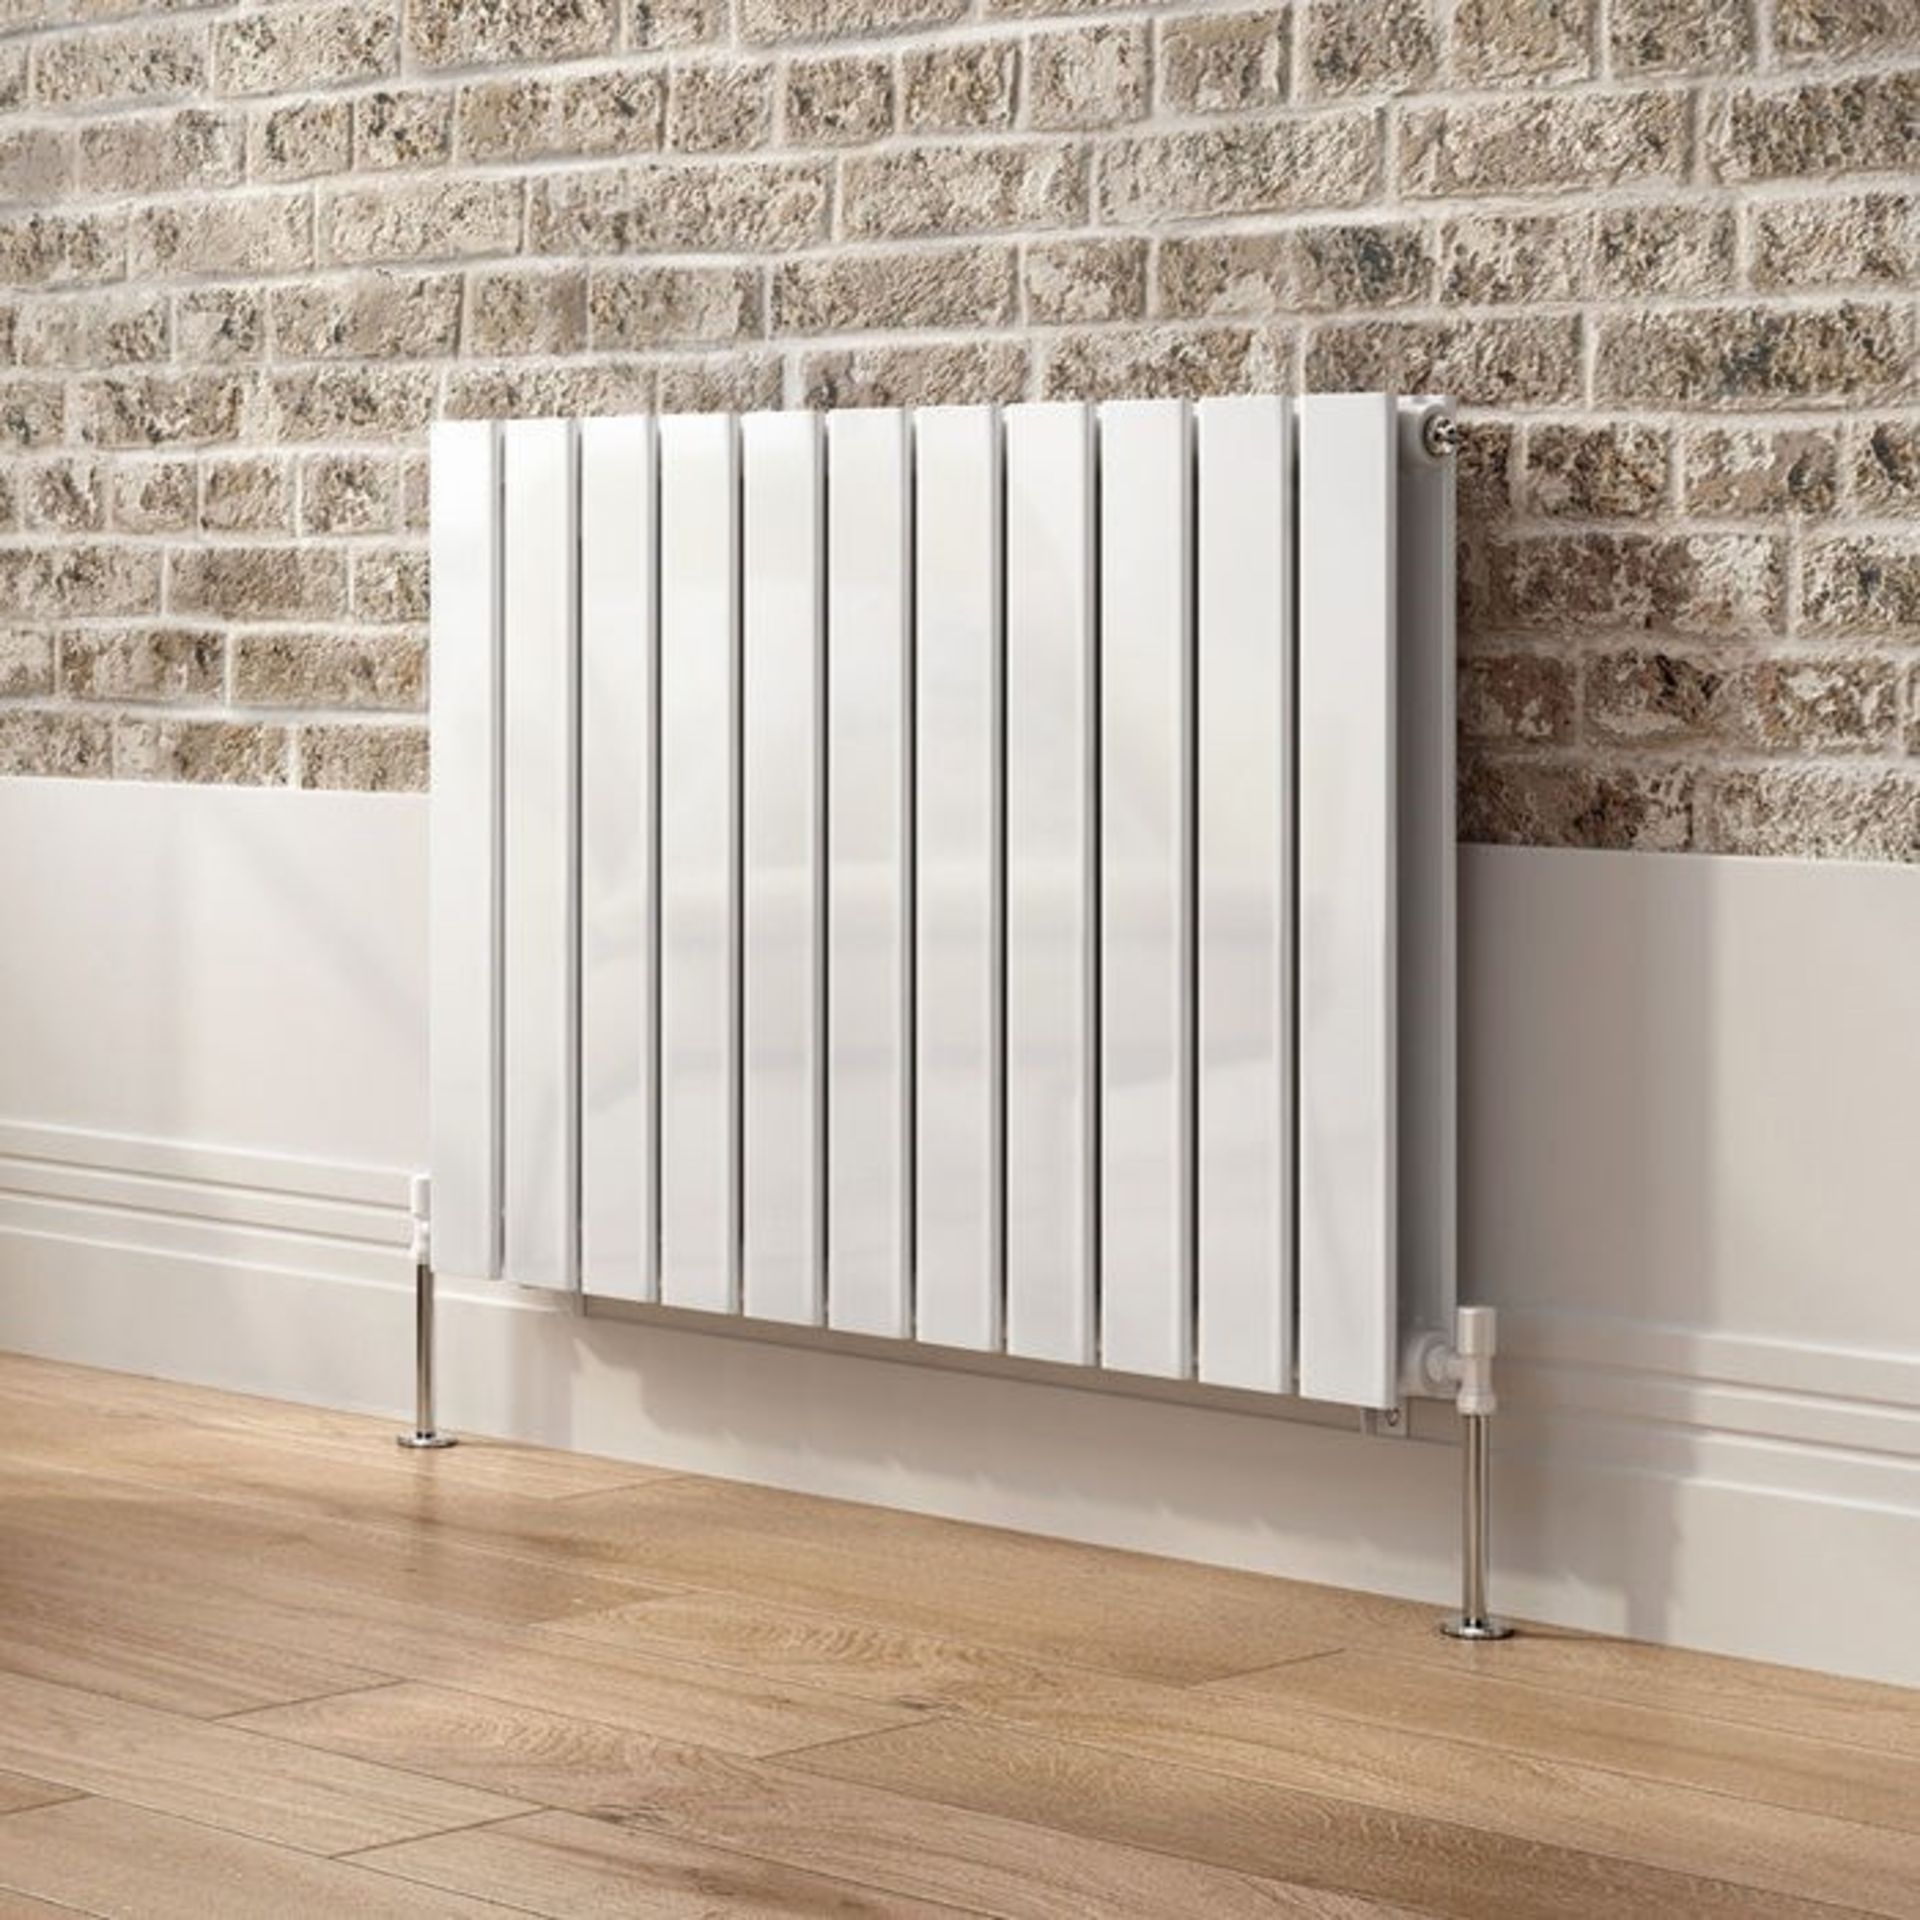 PALLET TO CONTAIN 6 X BRAND NEW BOXED 600x830mm Gloss White Double Flat Panel Horizontal Radiator. - Image 2 of 2